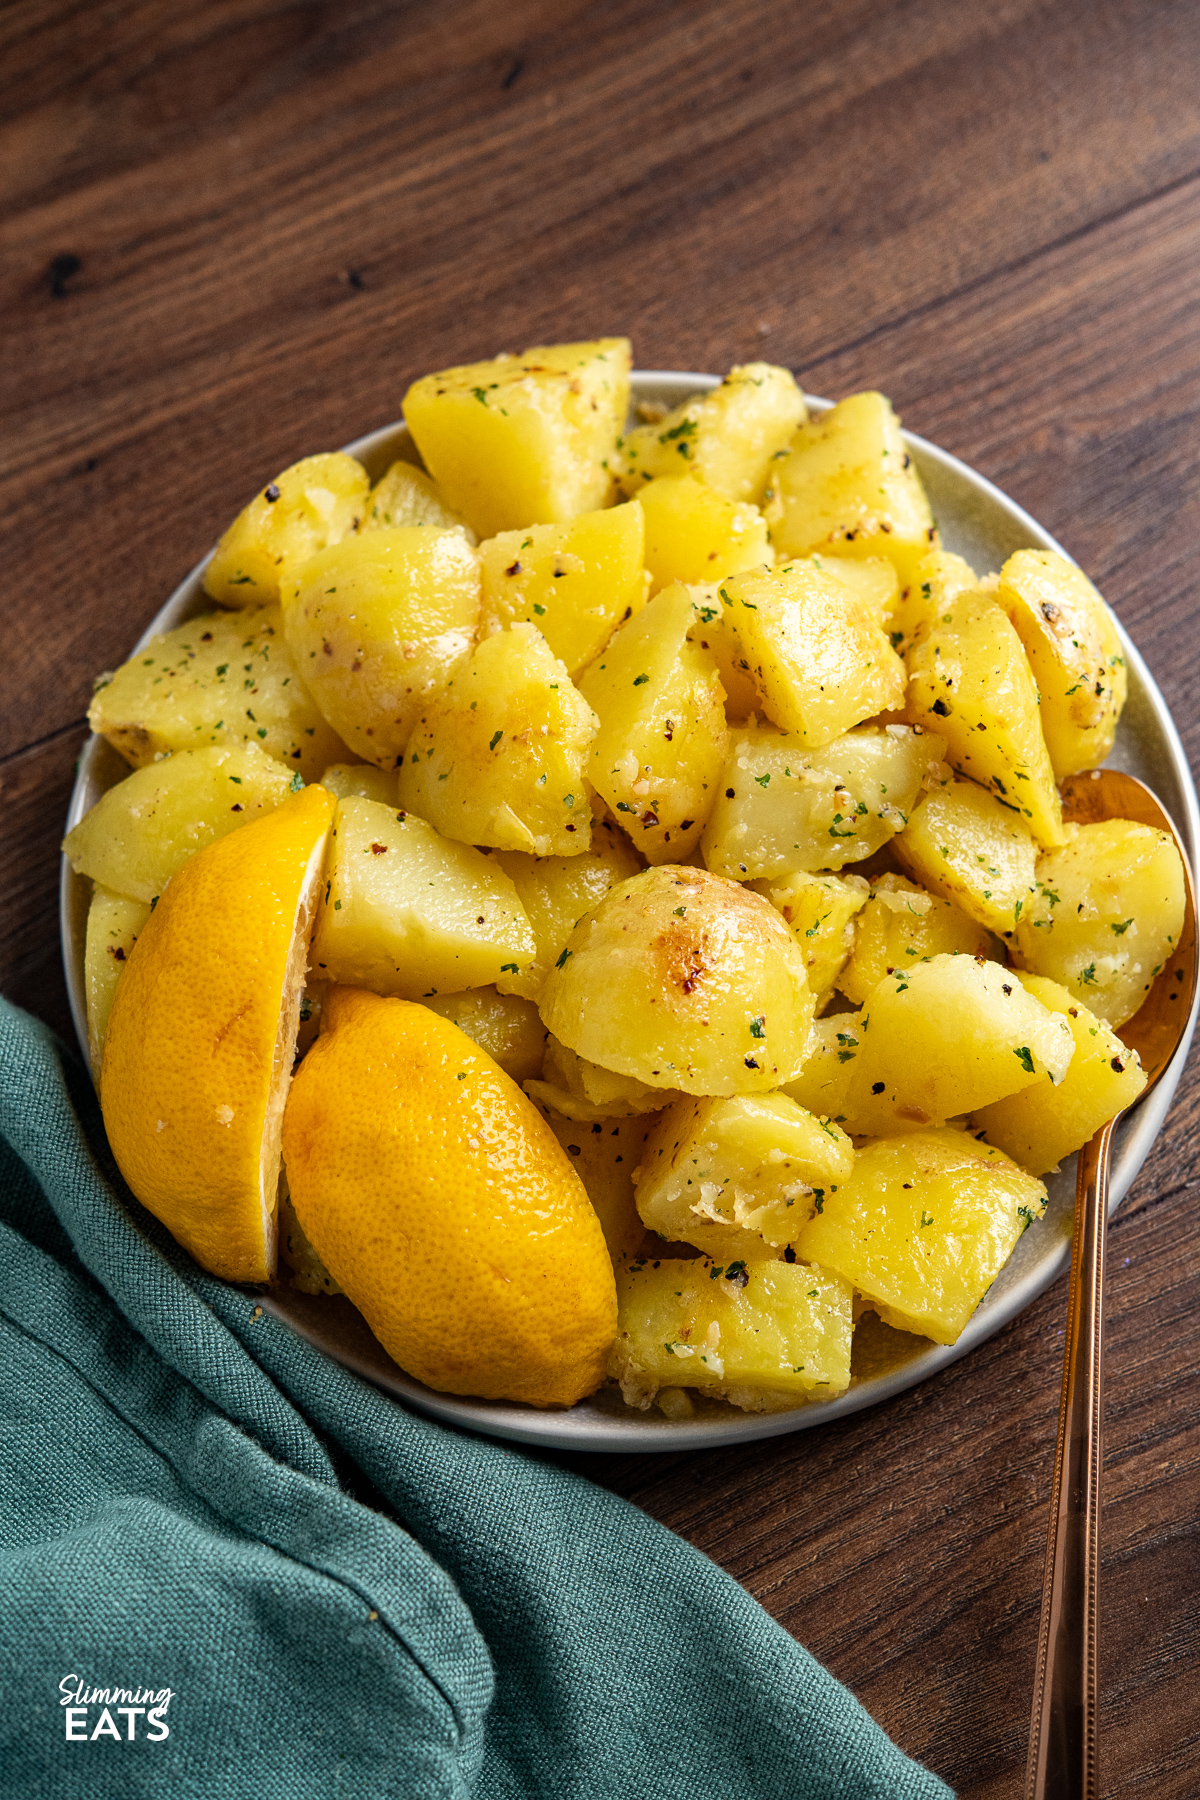 Ready to serve: Lemon garlic potatoes in a serving bowl with a spoon and lemon wedges